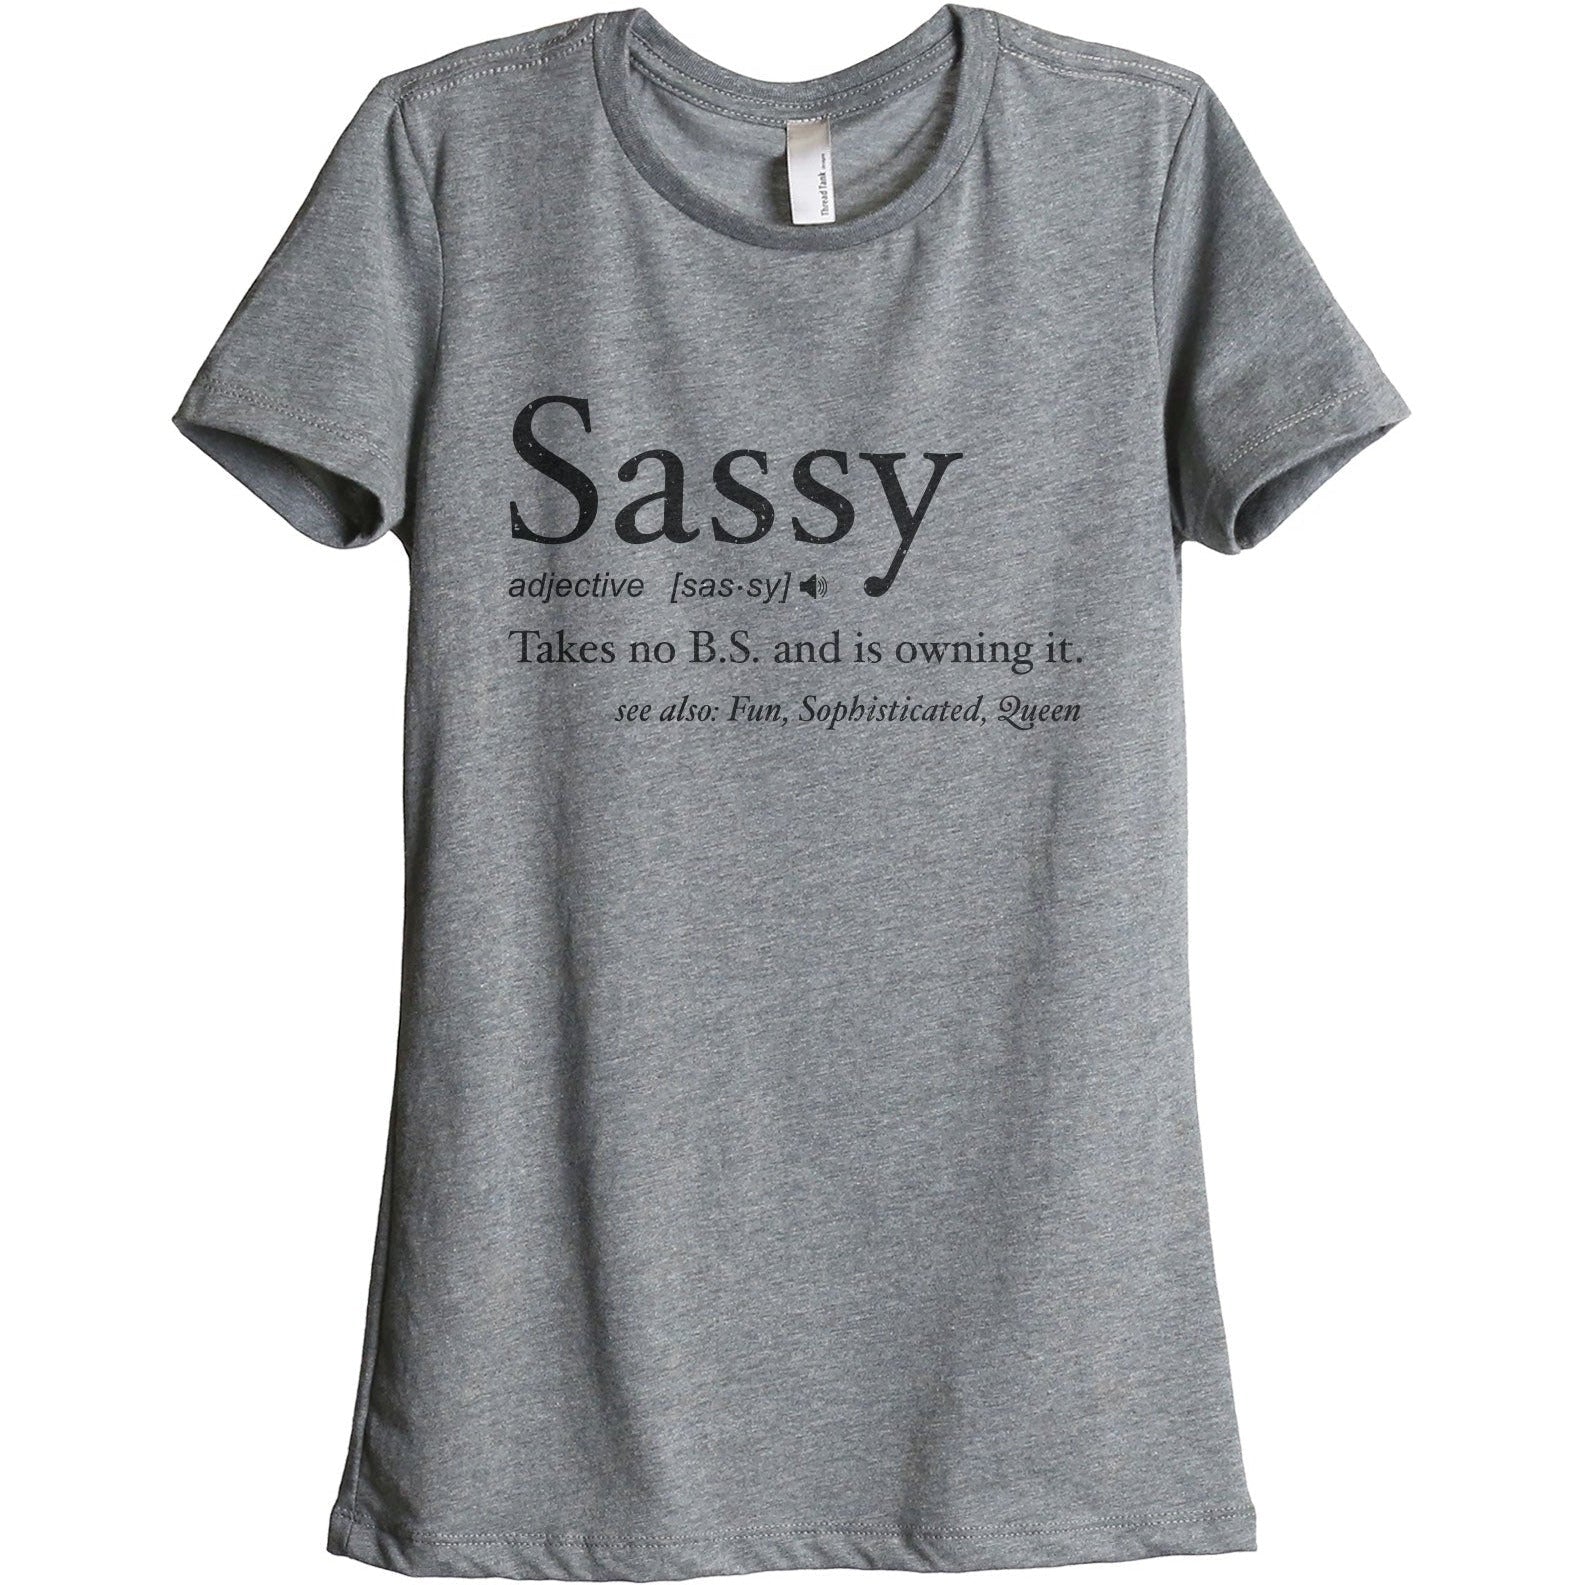 Types of Tops For Every Woman To Look Sassy Than Ever